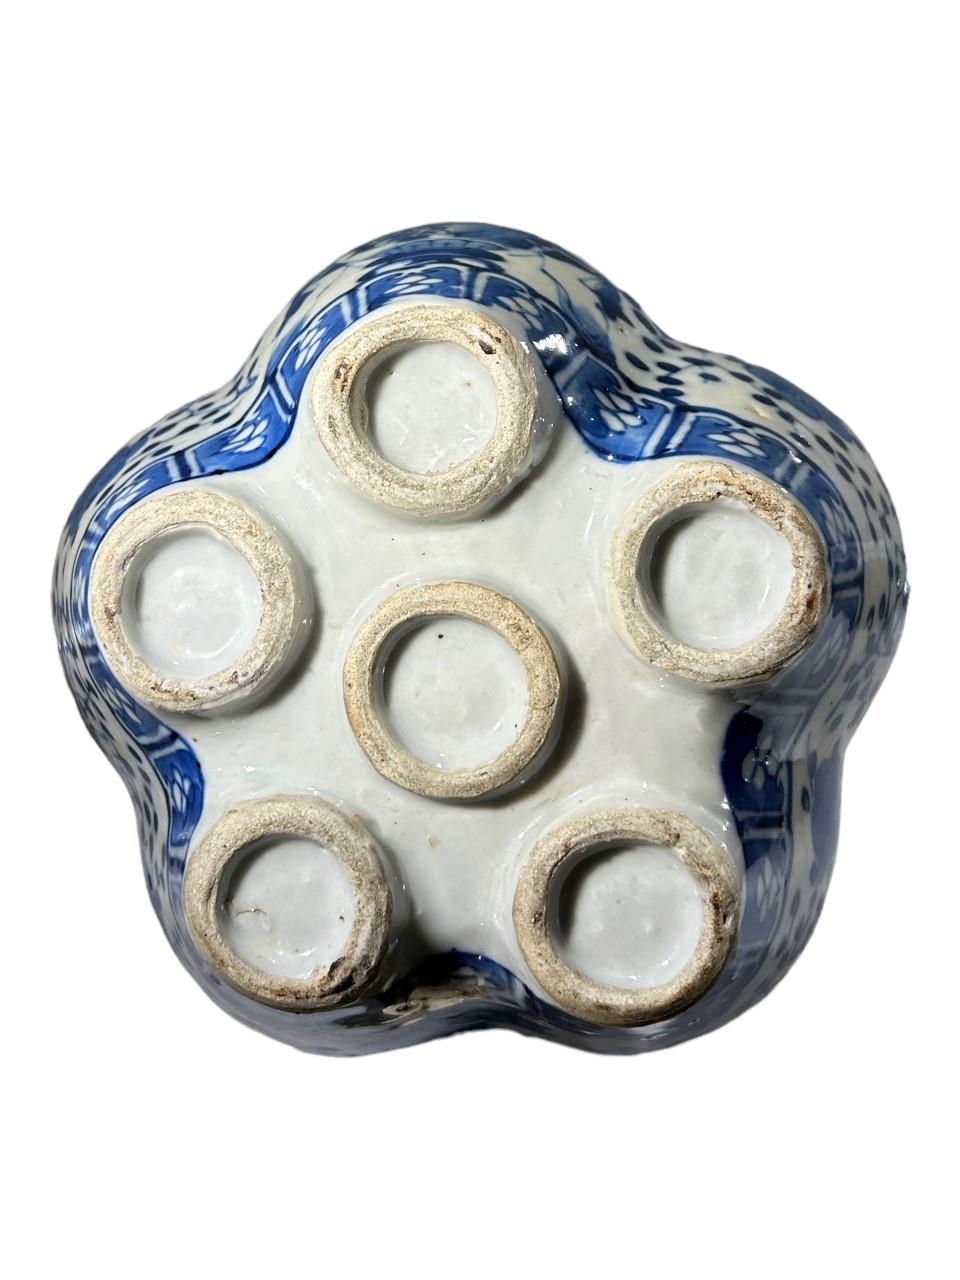 A LATE 19TH CENTURY CHINESE QING DYNASTY BLUE AND WHITE QUINTAL BULB VASE Having artichoke mouth, - Image 9 of 9